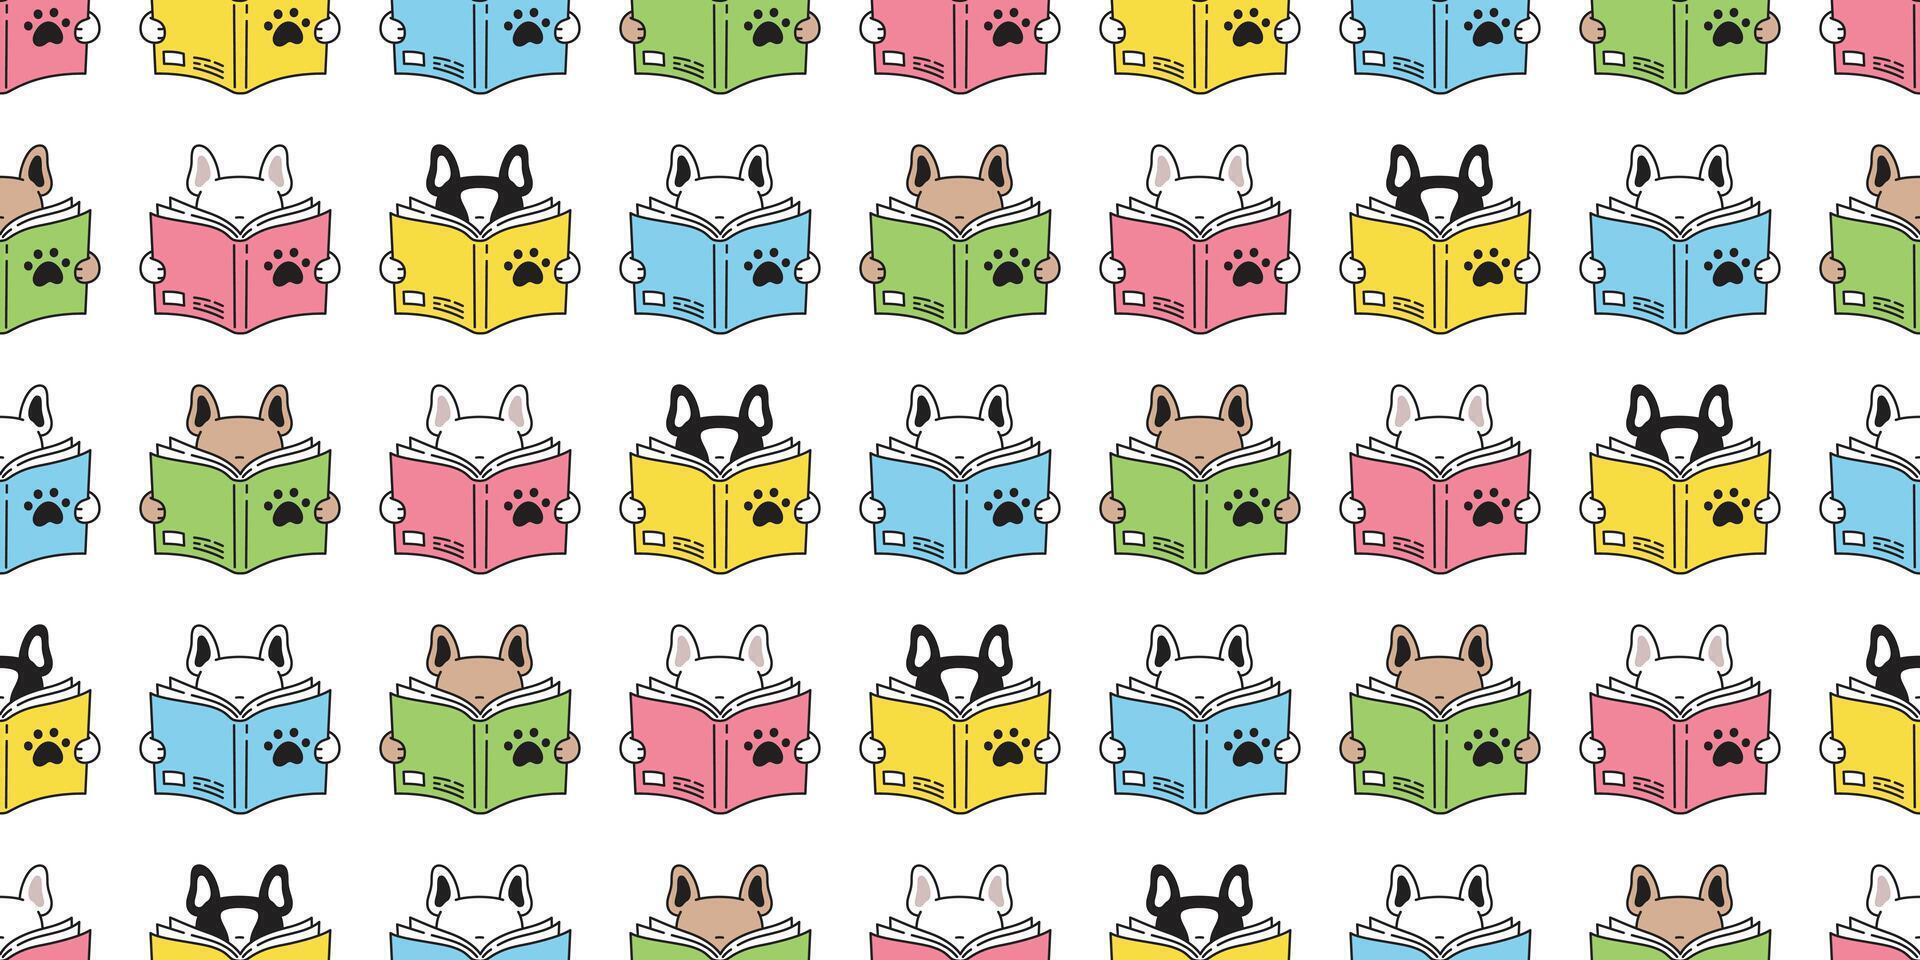 dog seamless pattern french bulldog reading book cartoon scarf isolated repeat wallpaper tile background doodle illustration design vector